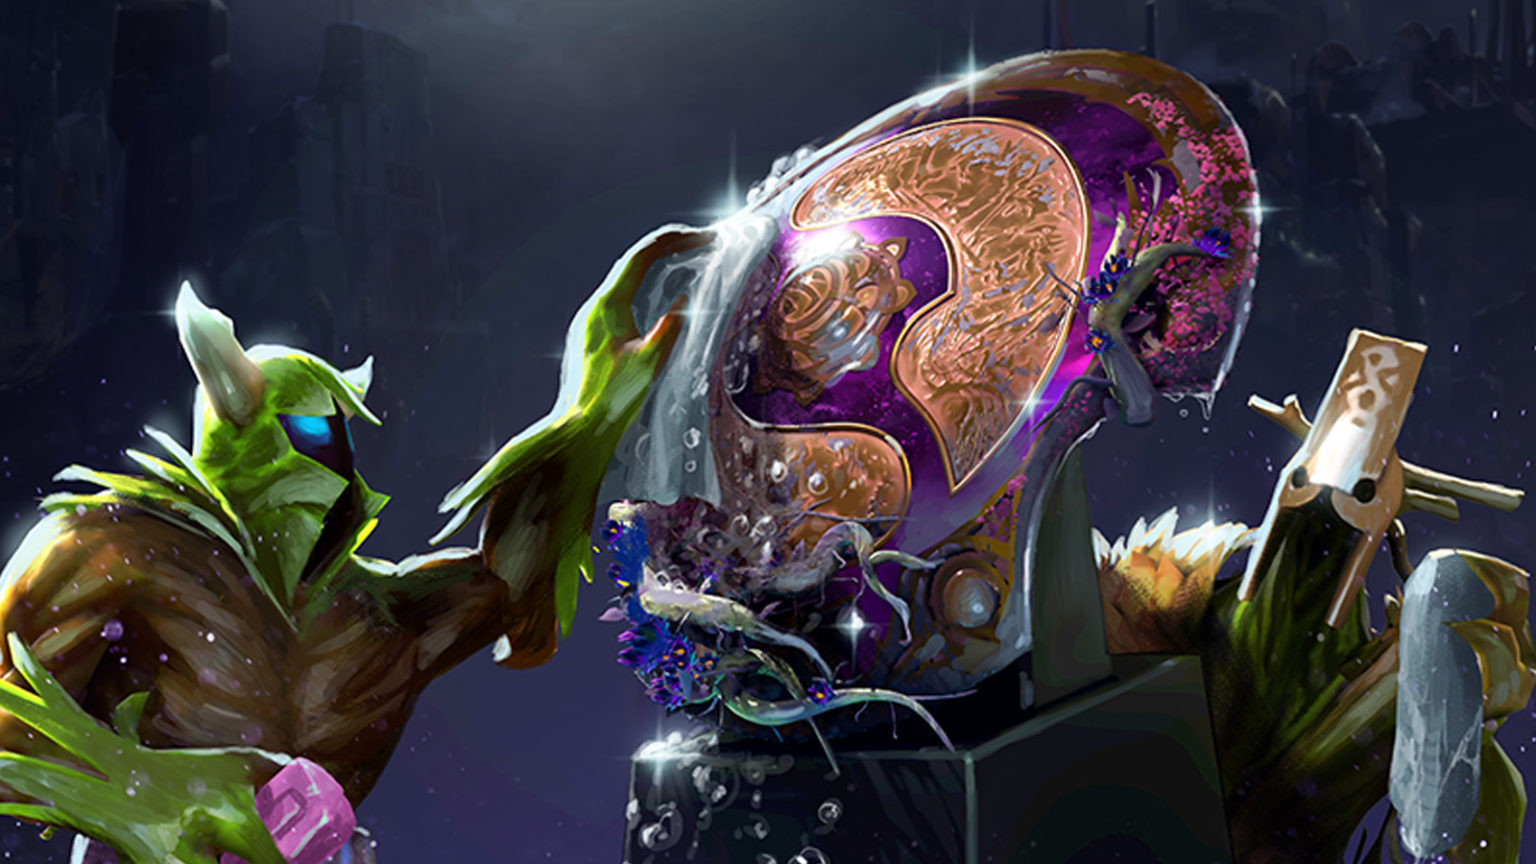 Dota 2 The International 2022 Last Chance Qualifier live updates: Full schedule, scores, and